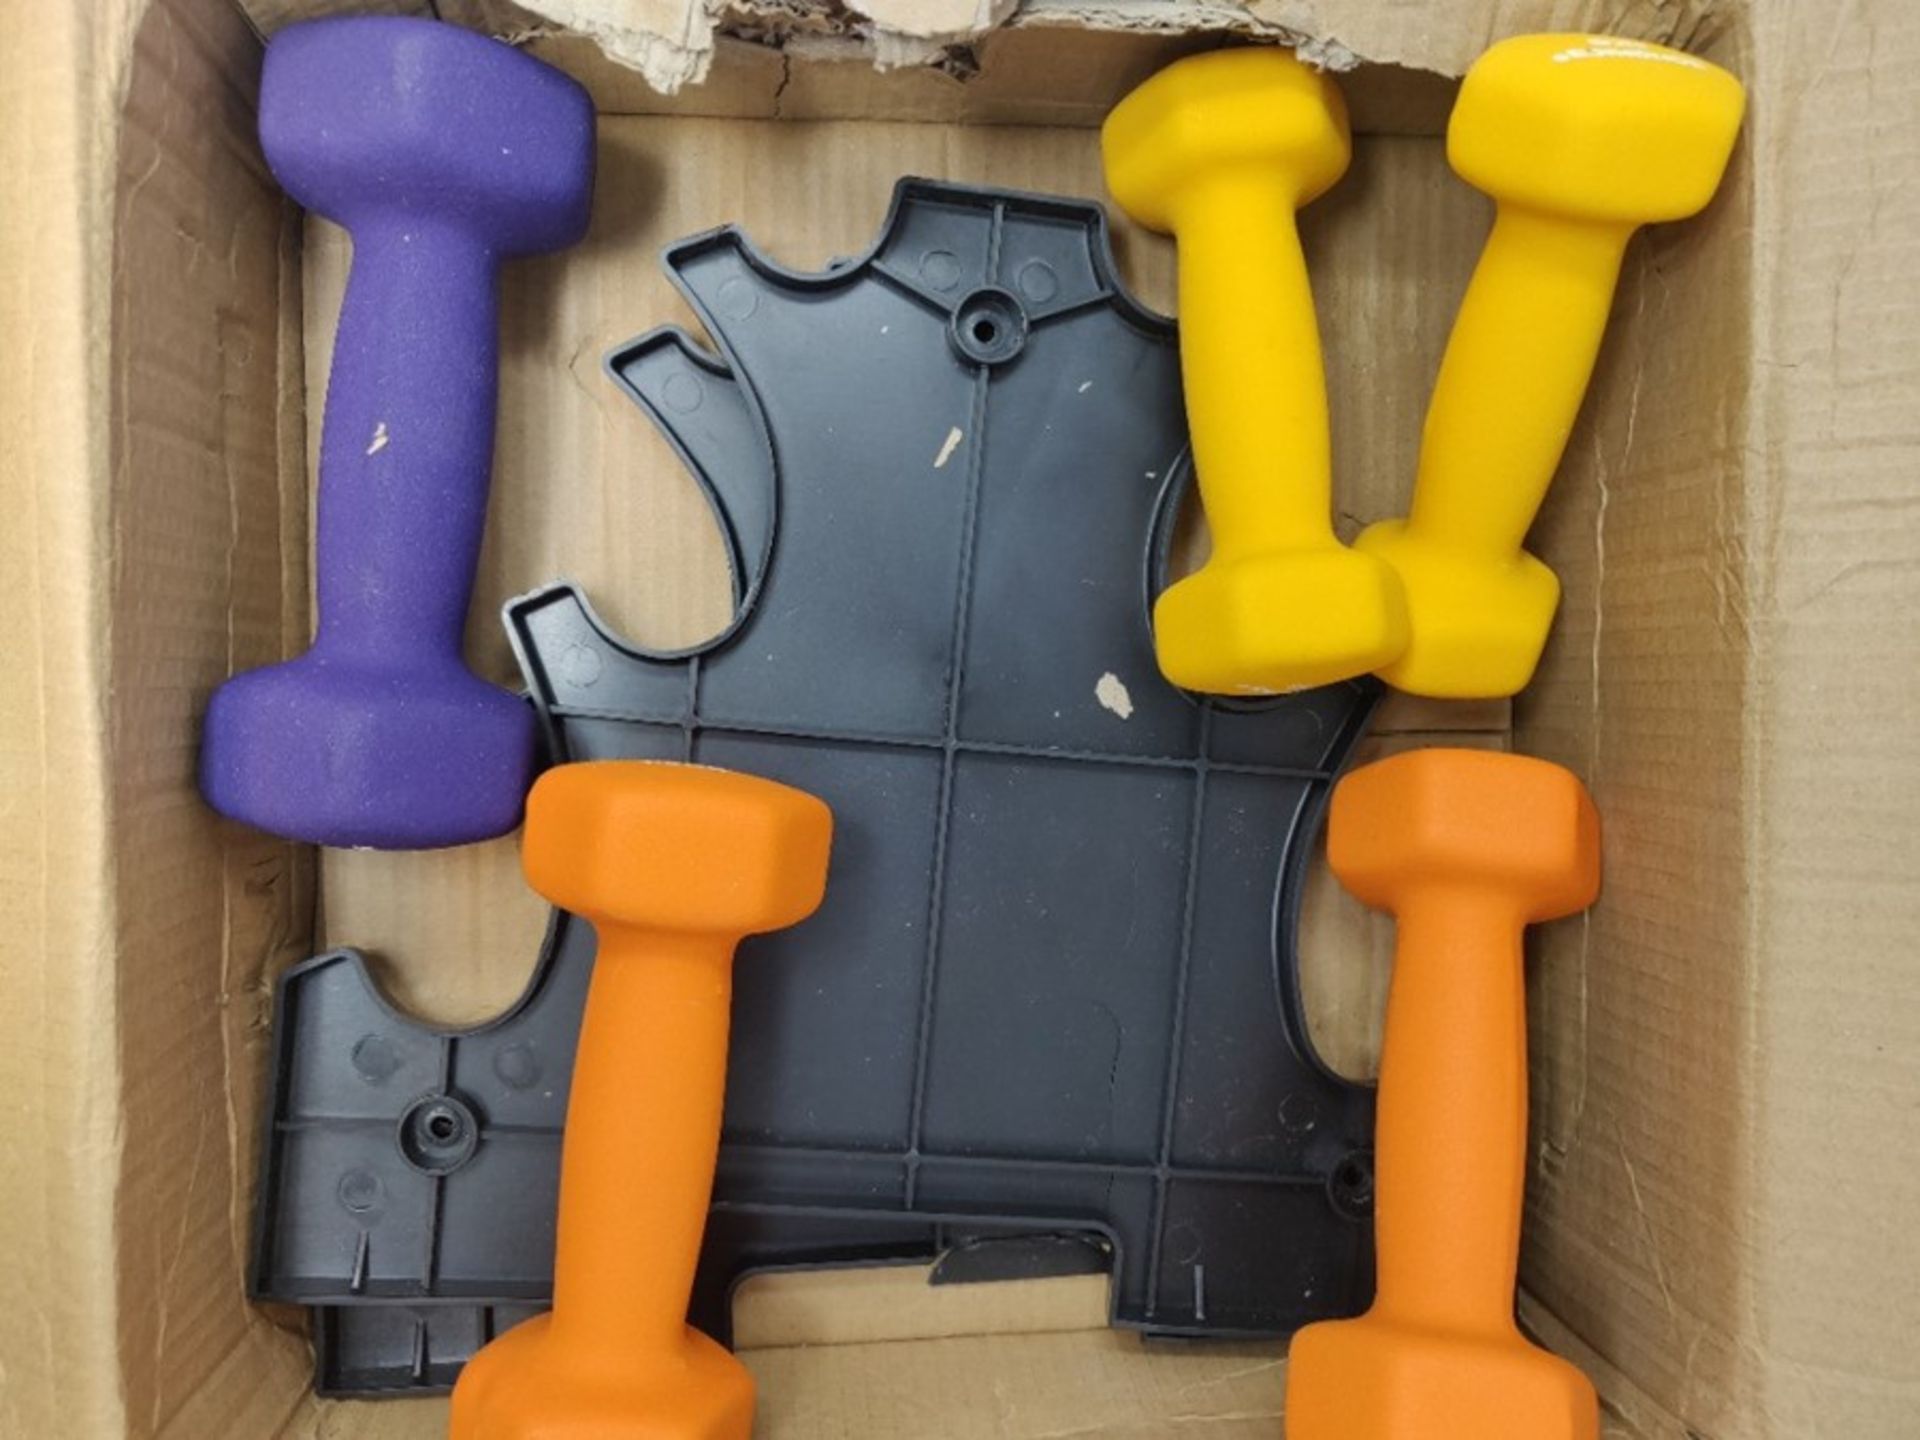 [INCOMPLETE] SONGMICS Set of 6 Dumbbells Weights Gym and Home Workouts Waterproof and - Image 2 of 2